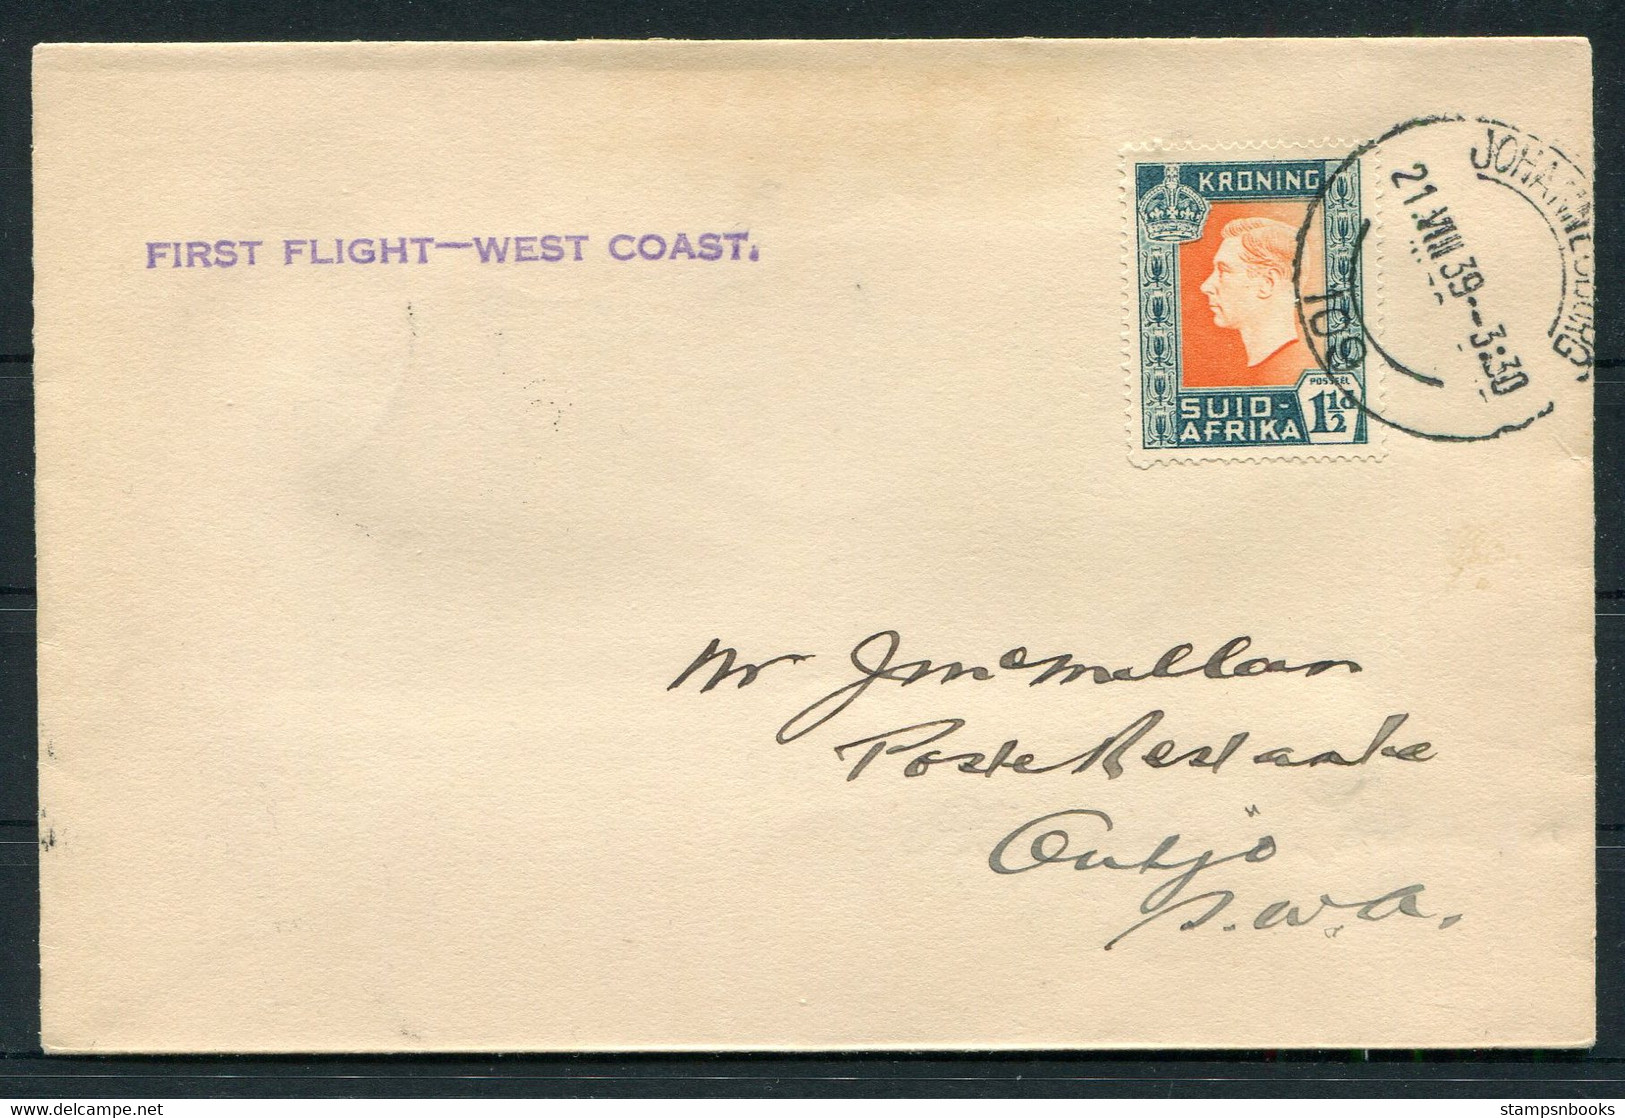 1939 (21st August) South Africa, West Coast Route First Flight Cover. Johannesburg - Outjo S.W.A. - Luftpost